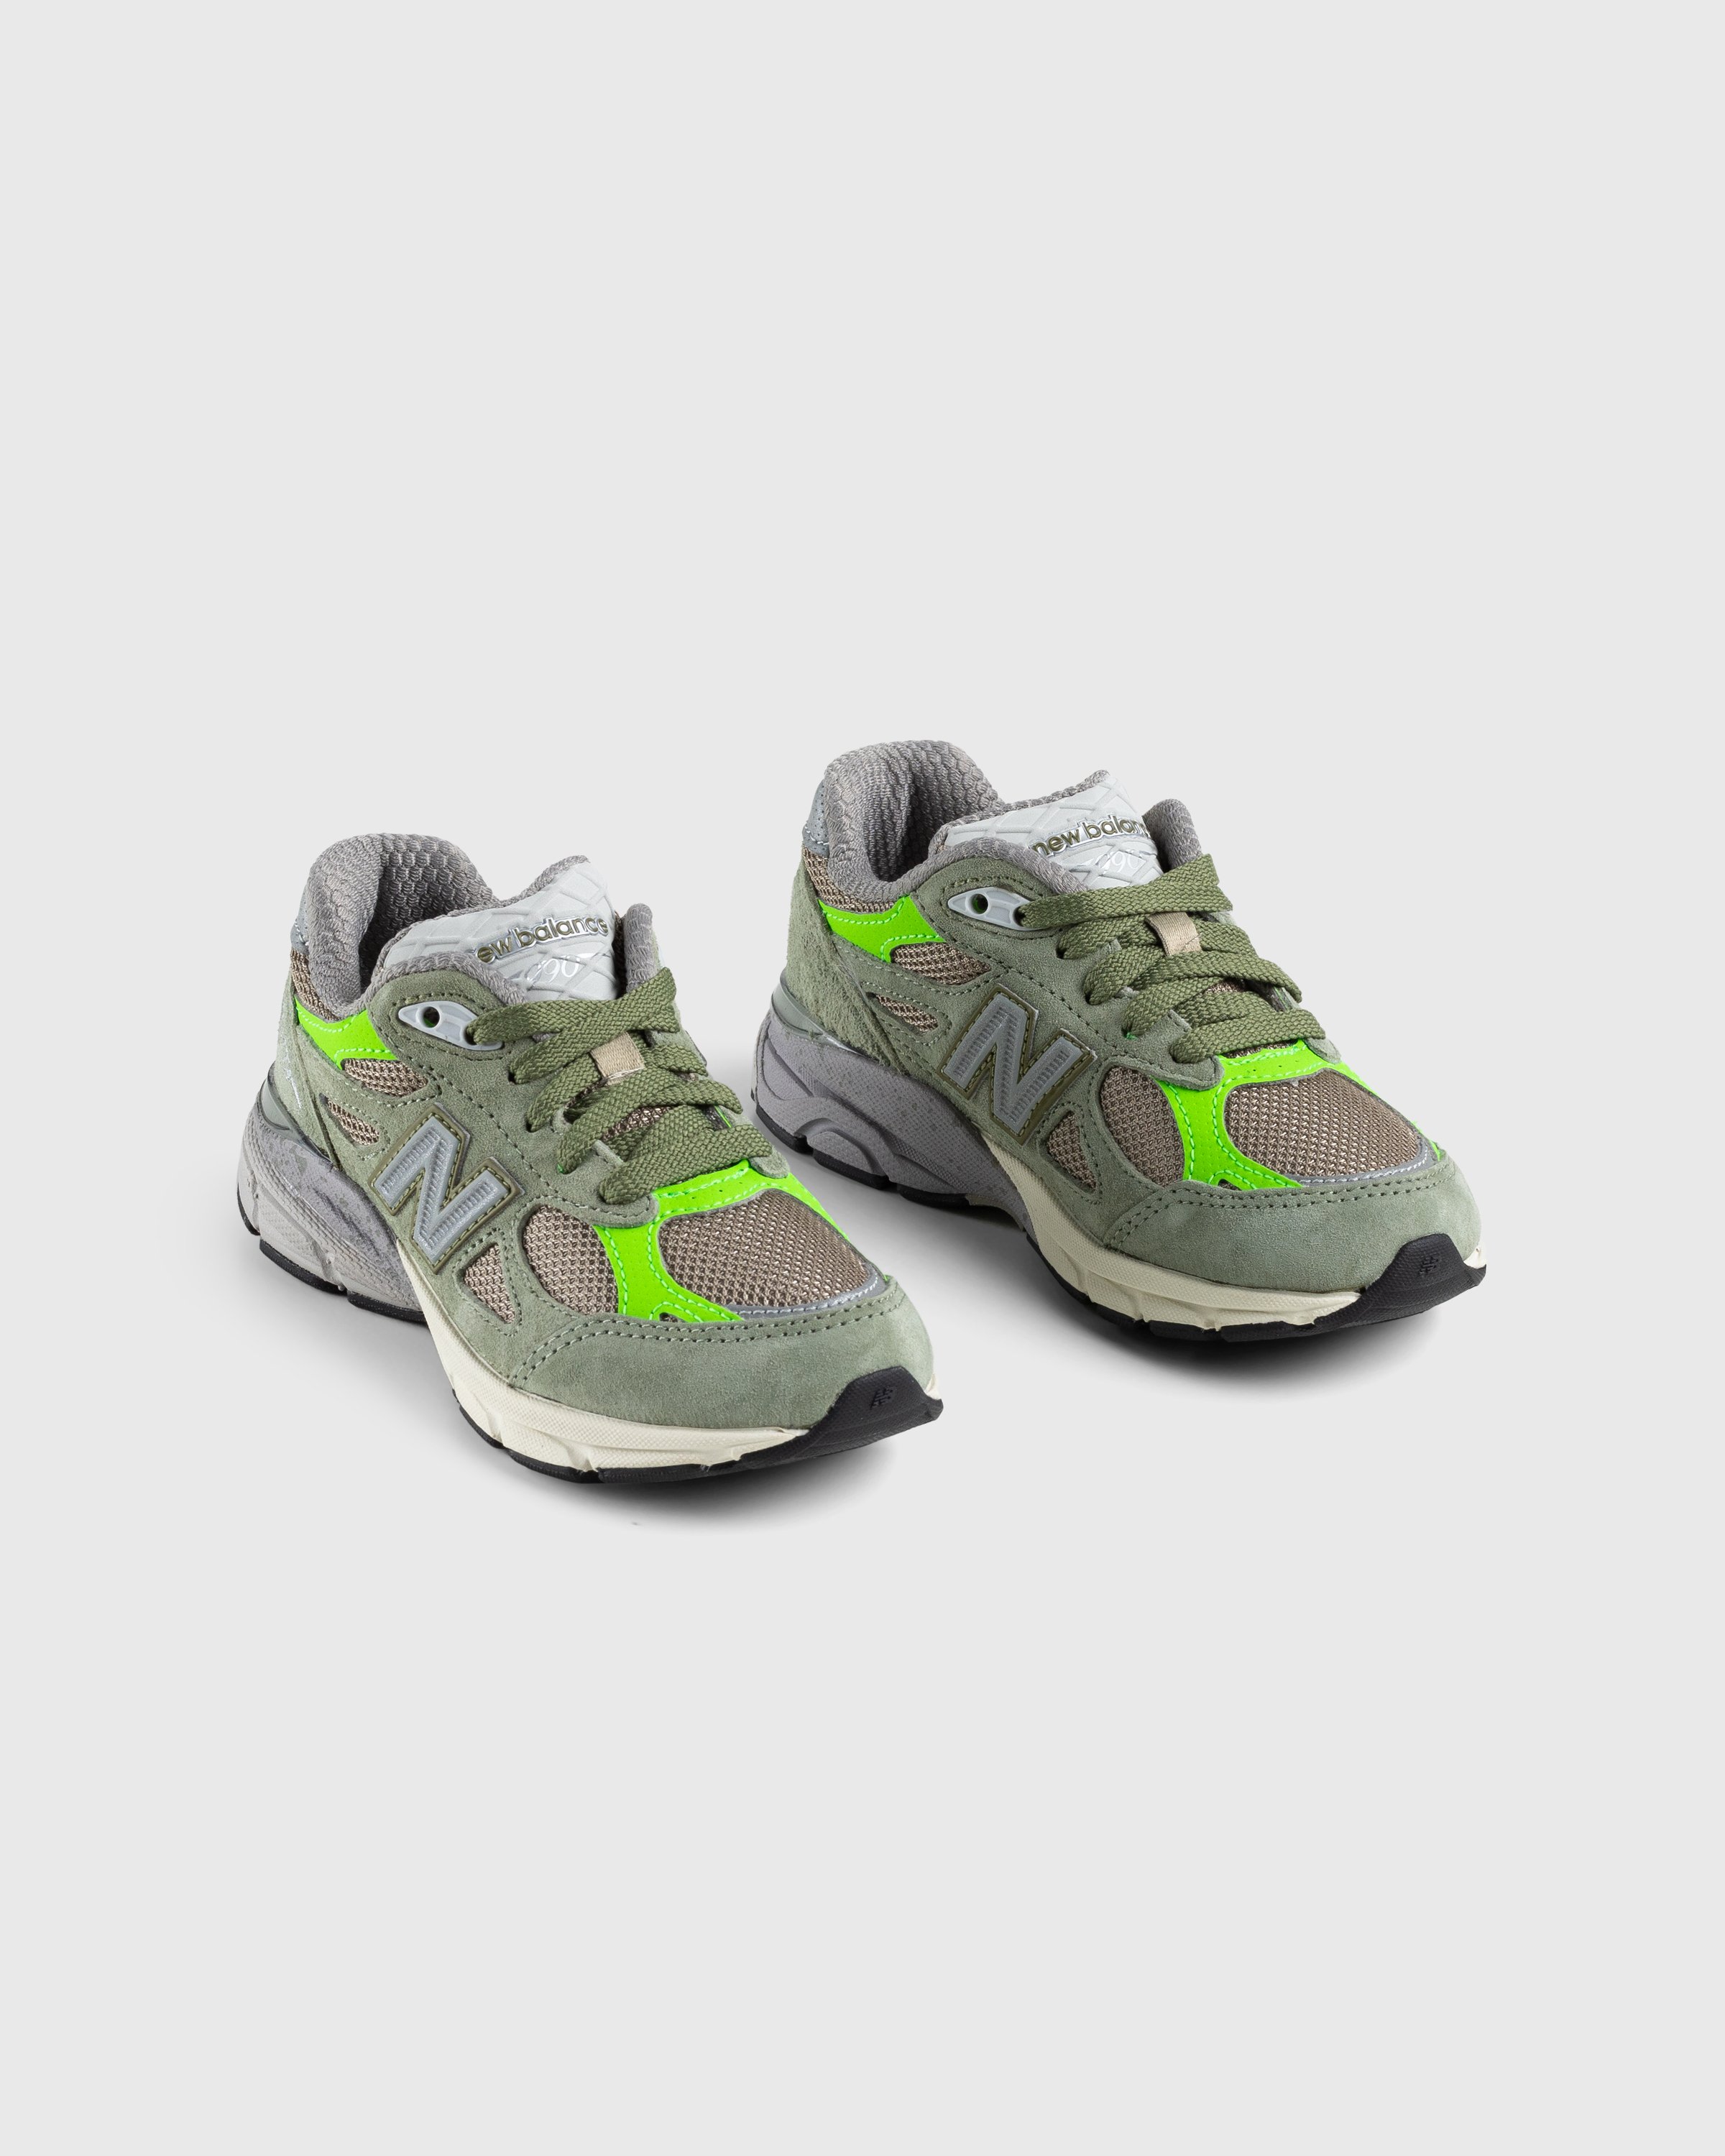 Patta x New Balance - Made in USA 990v3 Olive/White Pepper - Footwear - Green - Image 3